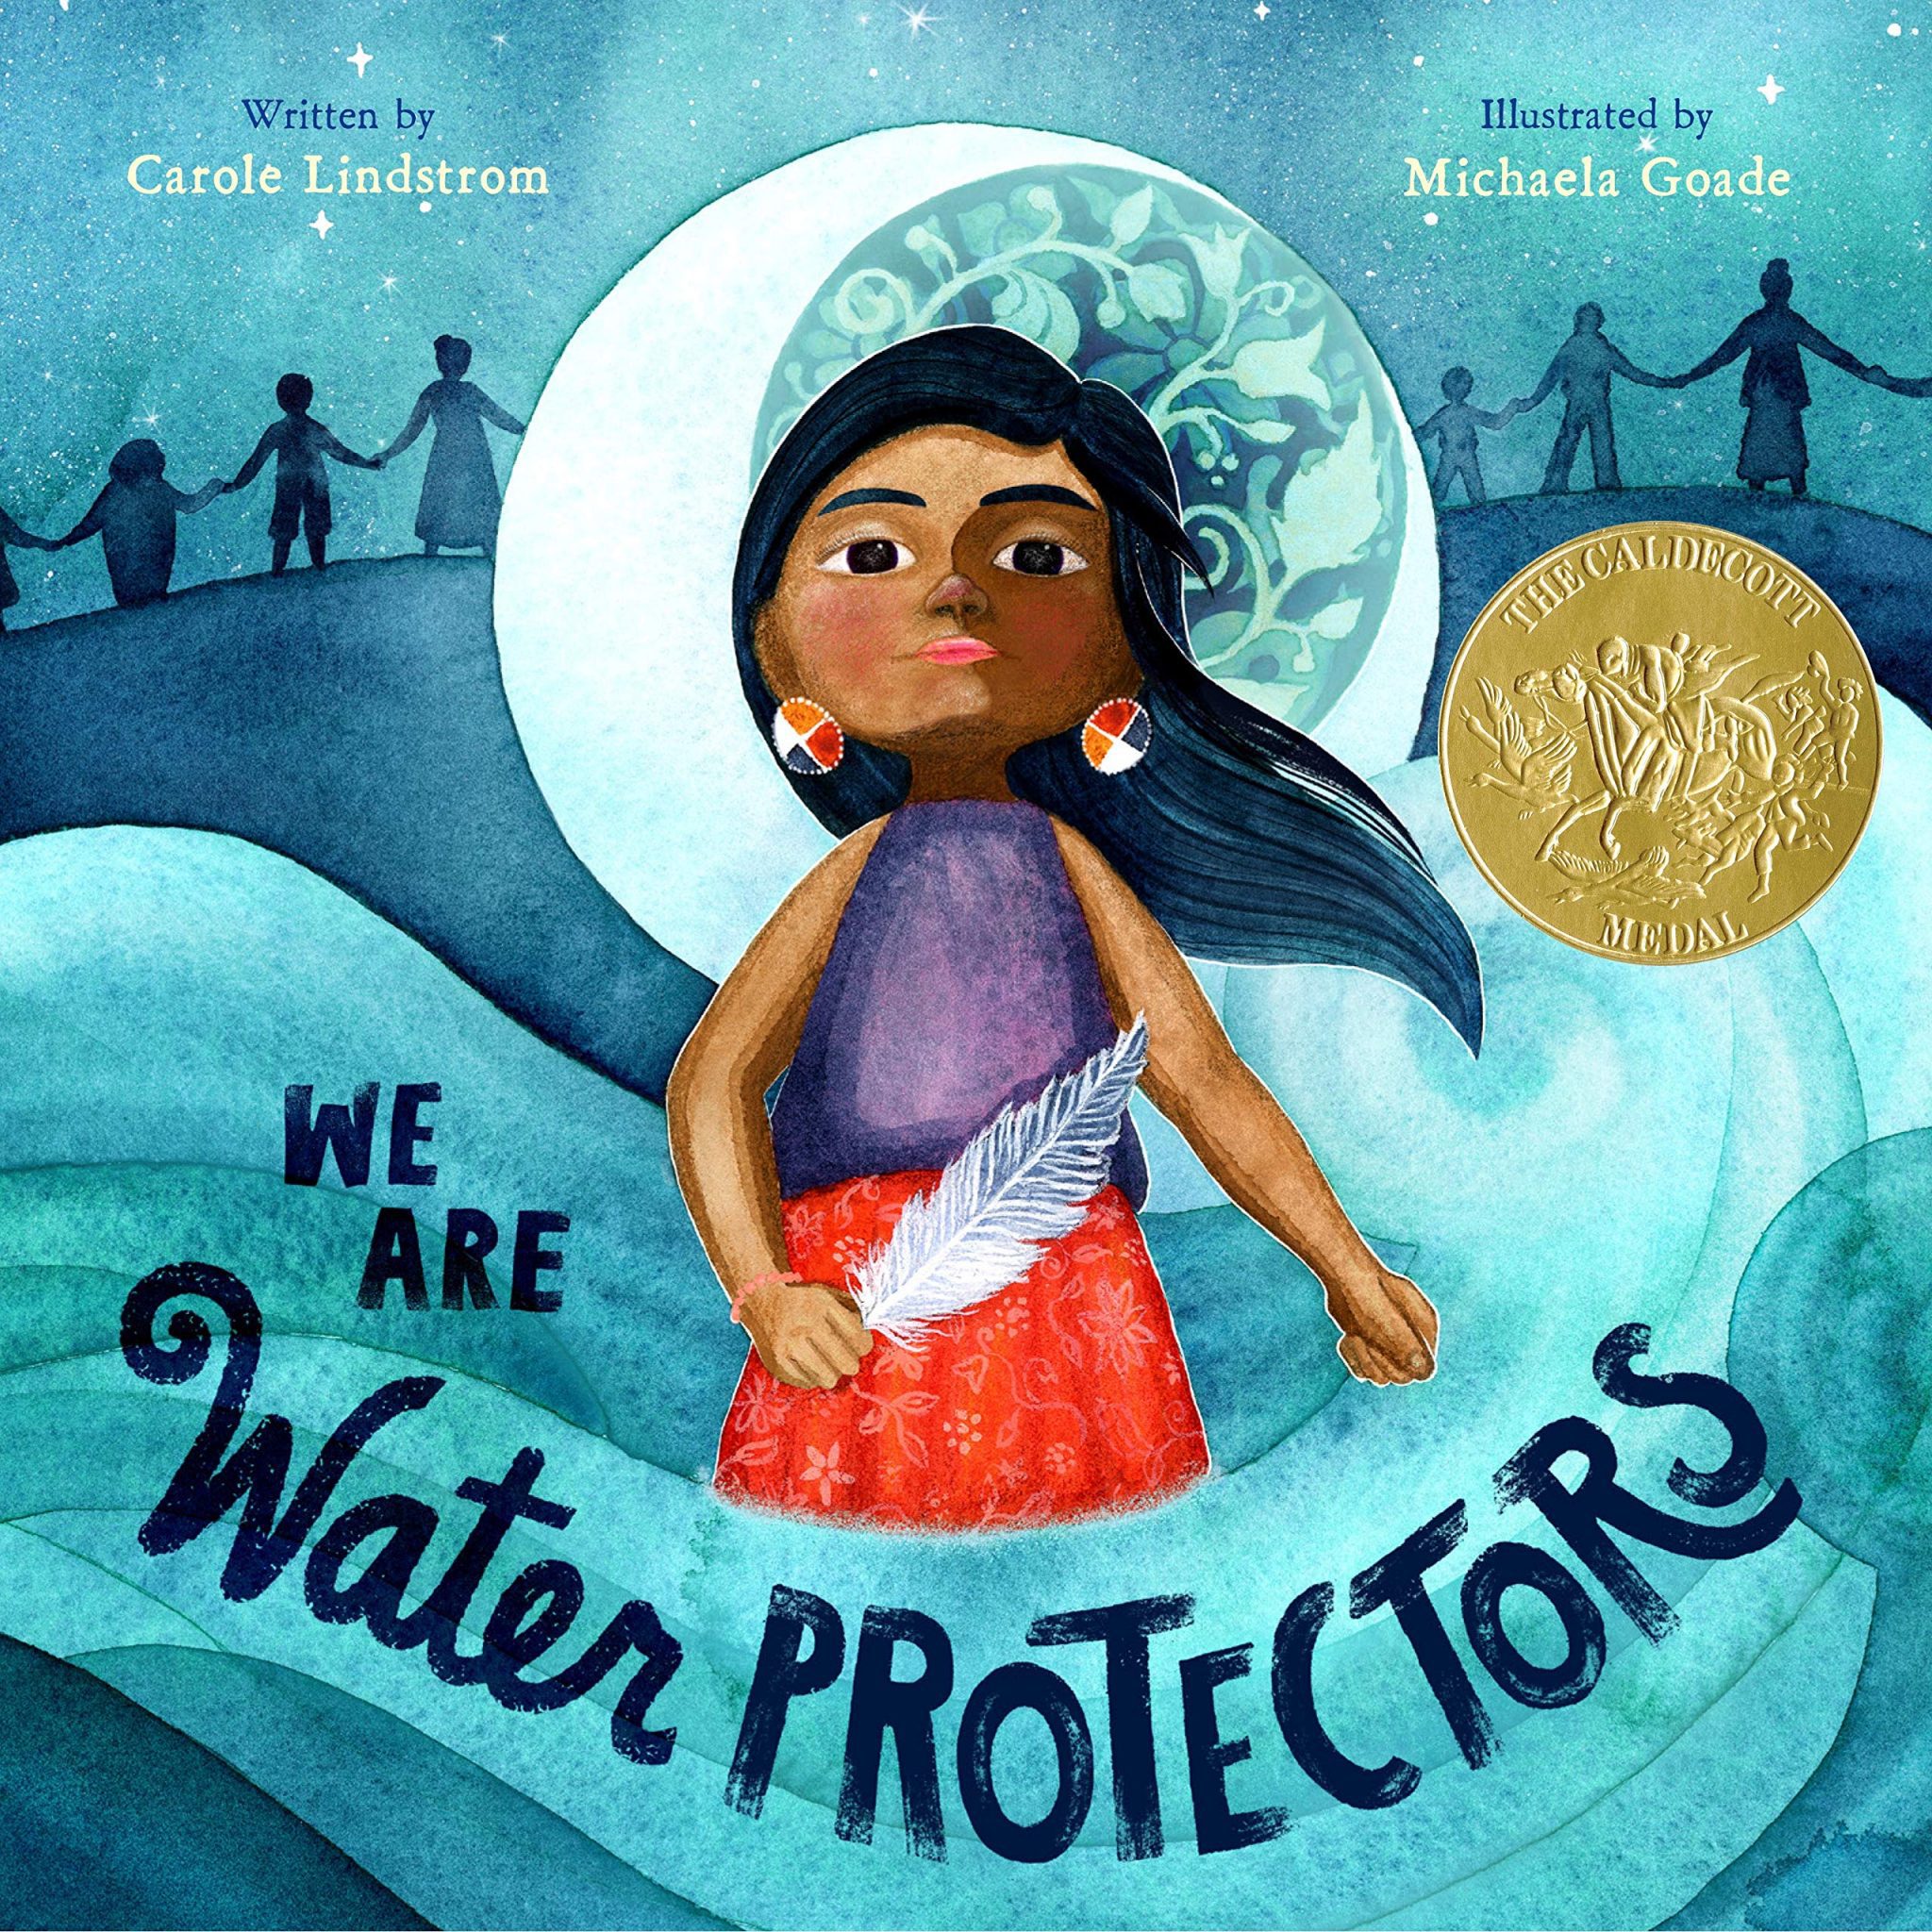 Book cover - We Are Water Protectors written by Carole Lindstrom illustrated by Michaela Goade